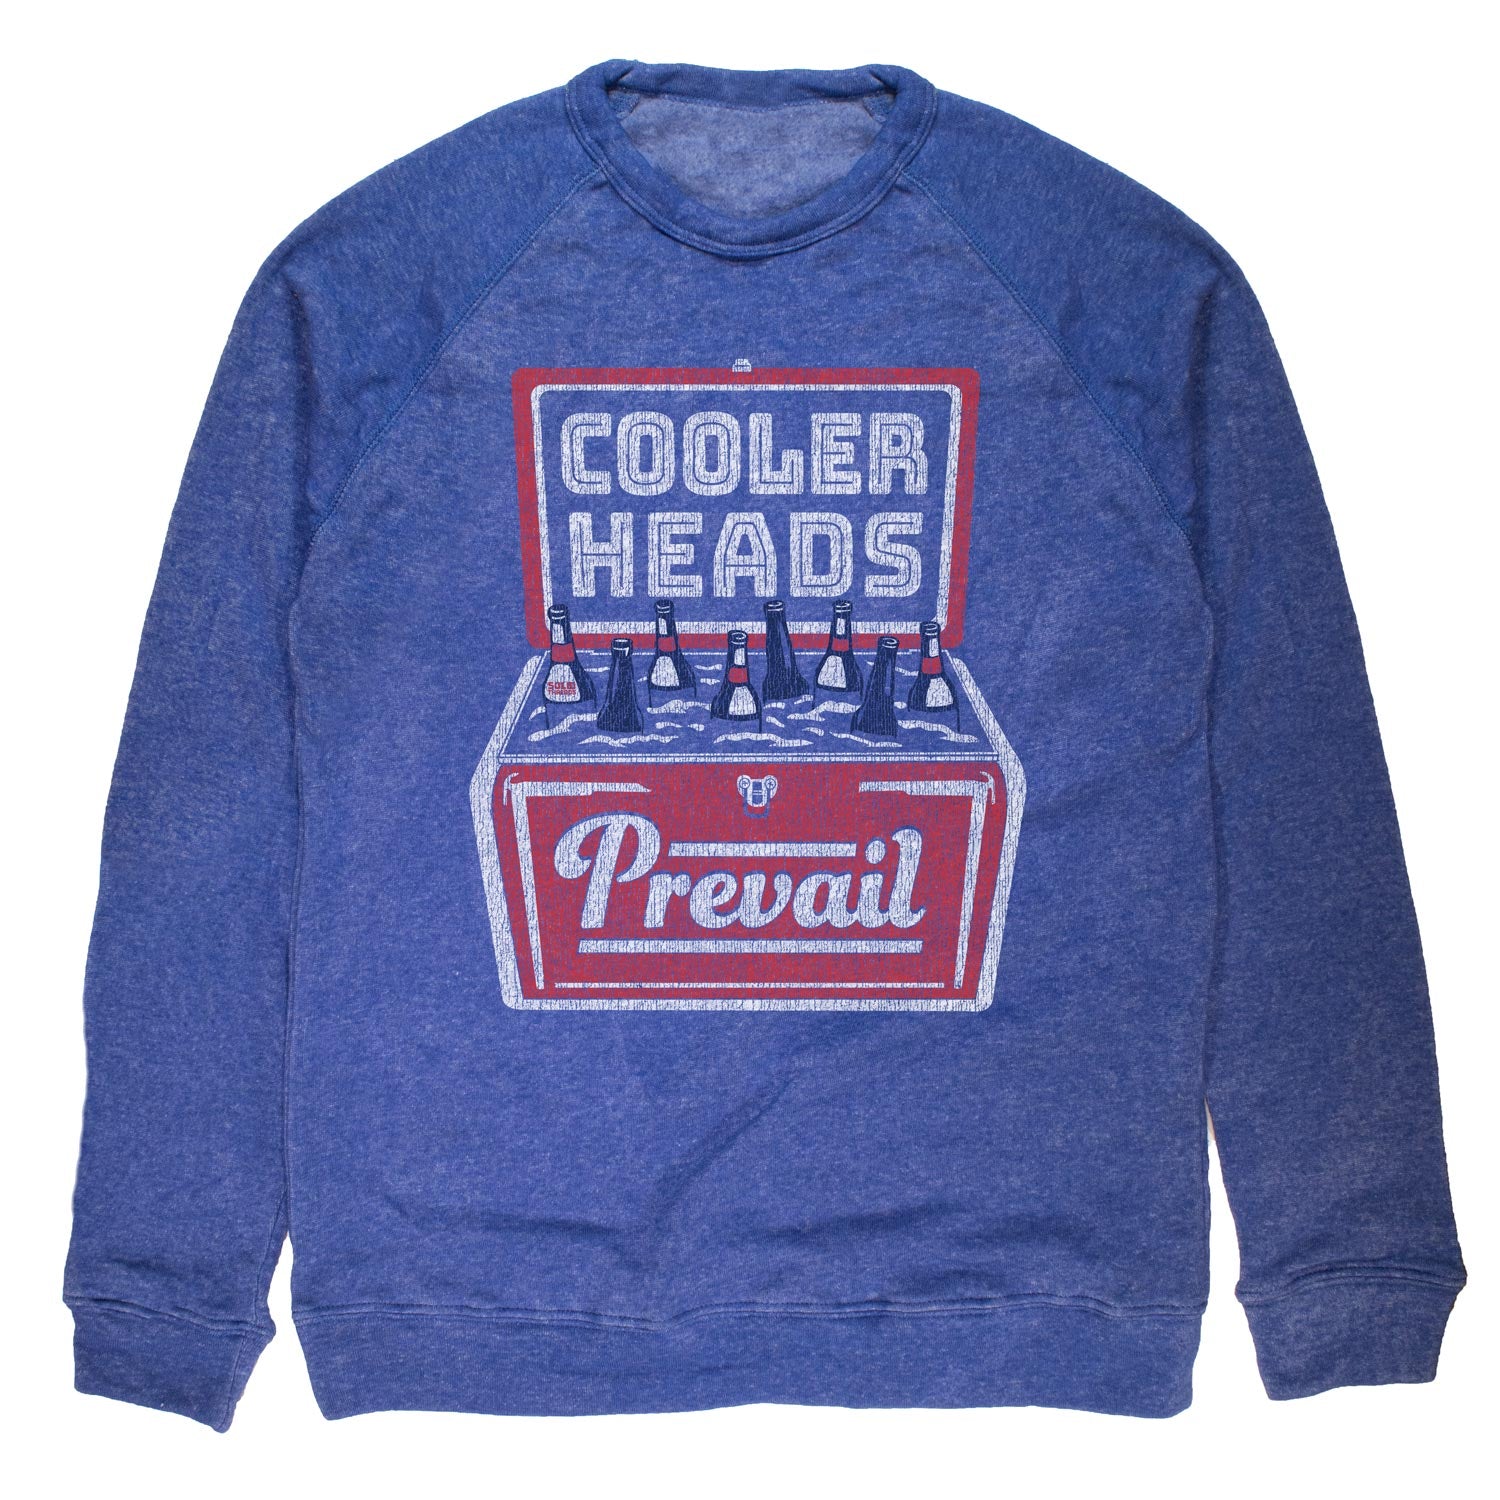 Cooler Heads Prevail Vintage Fleece Crewneck Sweatshirt | Funny Party Graphic | Solid Threads